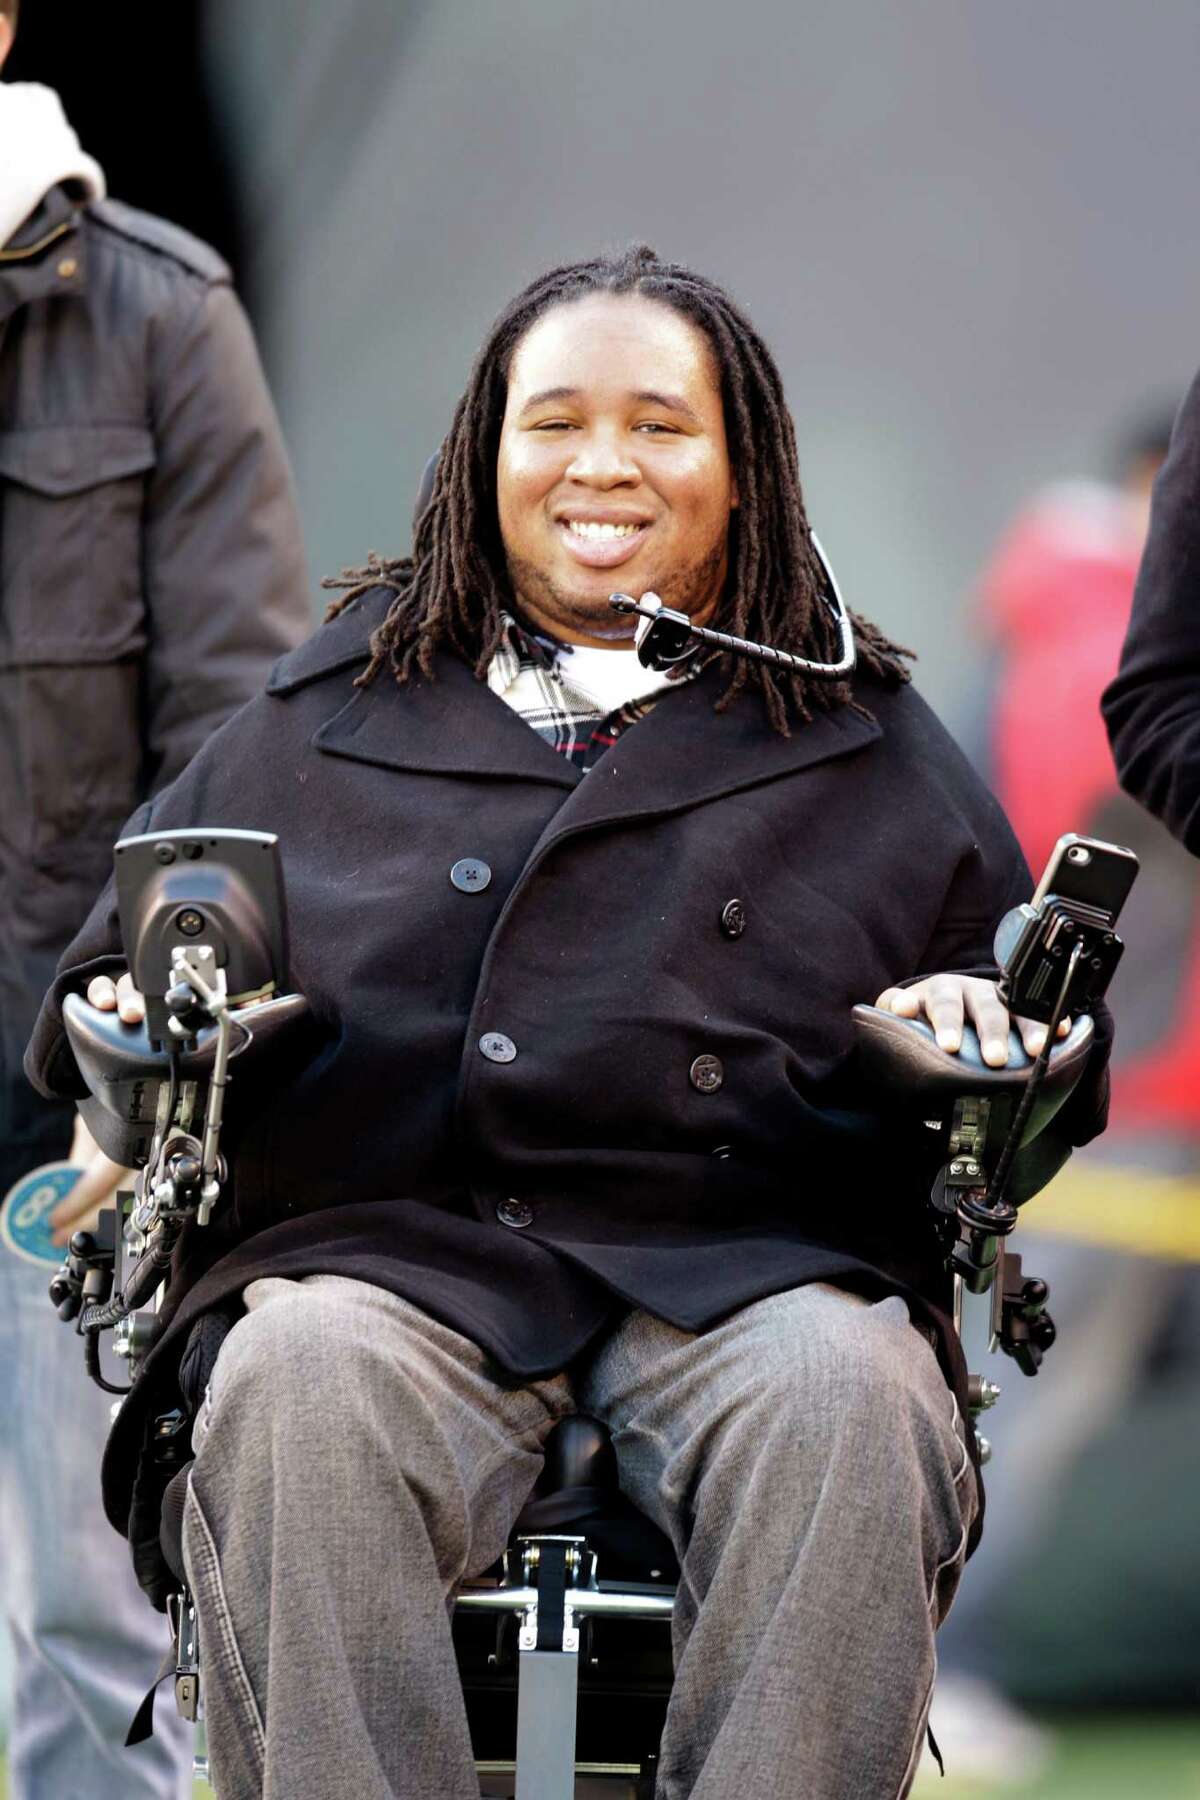 FILE - This Dec. 24, 2011 file photo shows paralyzed former Rutger's football player Eric LeGrand smiling on the sidelines before an NFL football game between the New York Giants and the New York Jets, in East Rutherford, N.J. LeGrand has been signed by the Tampa Bay Buccaneers. LeGrand broke two vertebrae and suffered a serious spinal cord injury on Oct. 16, 2010 during a kickoff return against Army. His coach at Rutgers then, Greg Schiano, now is coach of the Bucs.